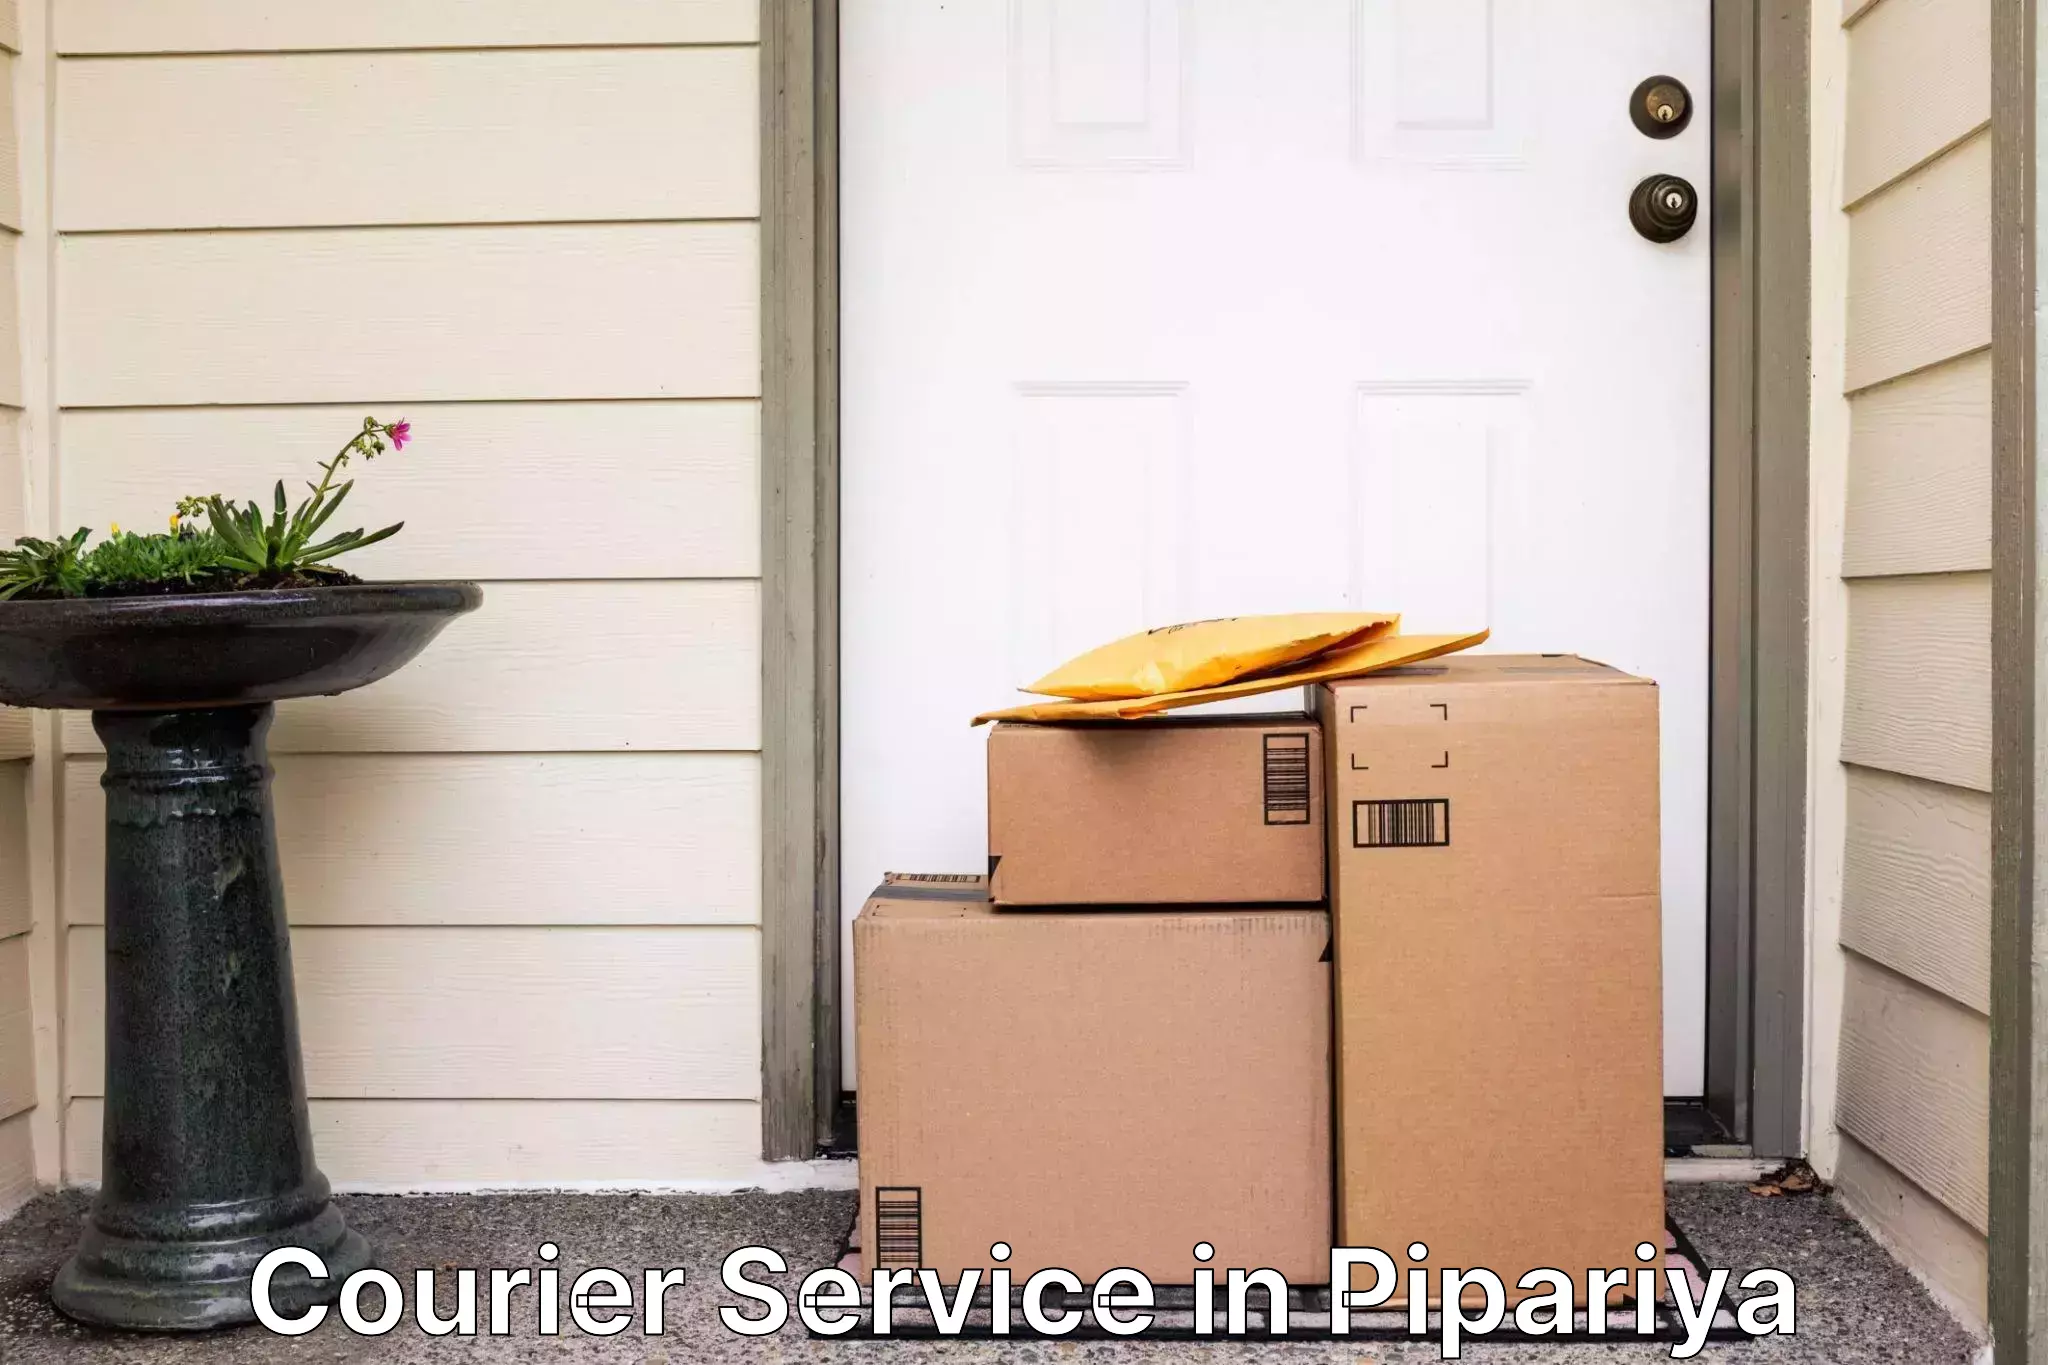 Express courier capabilities in Pipariya